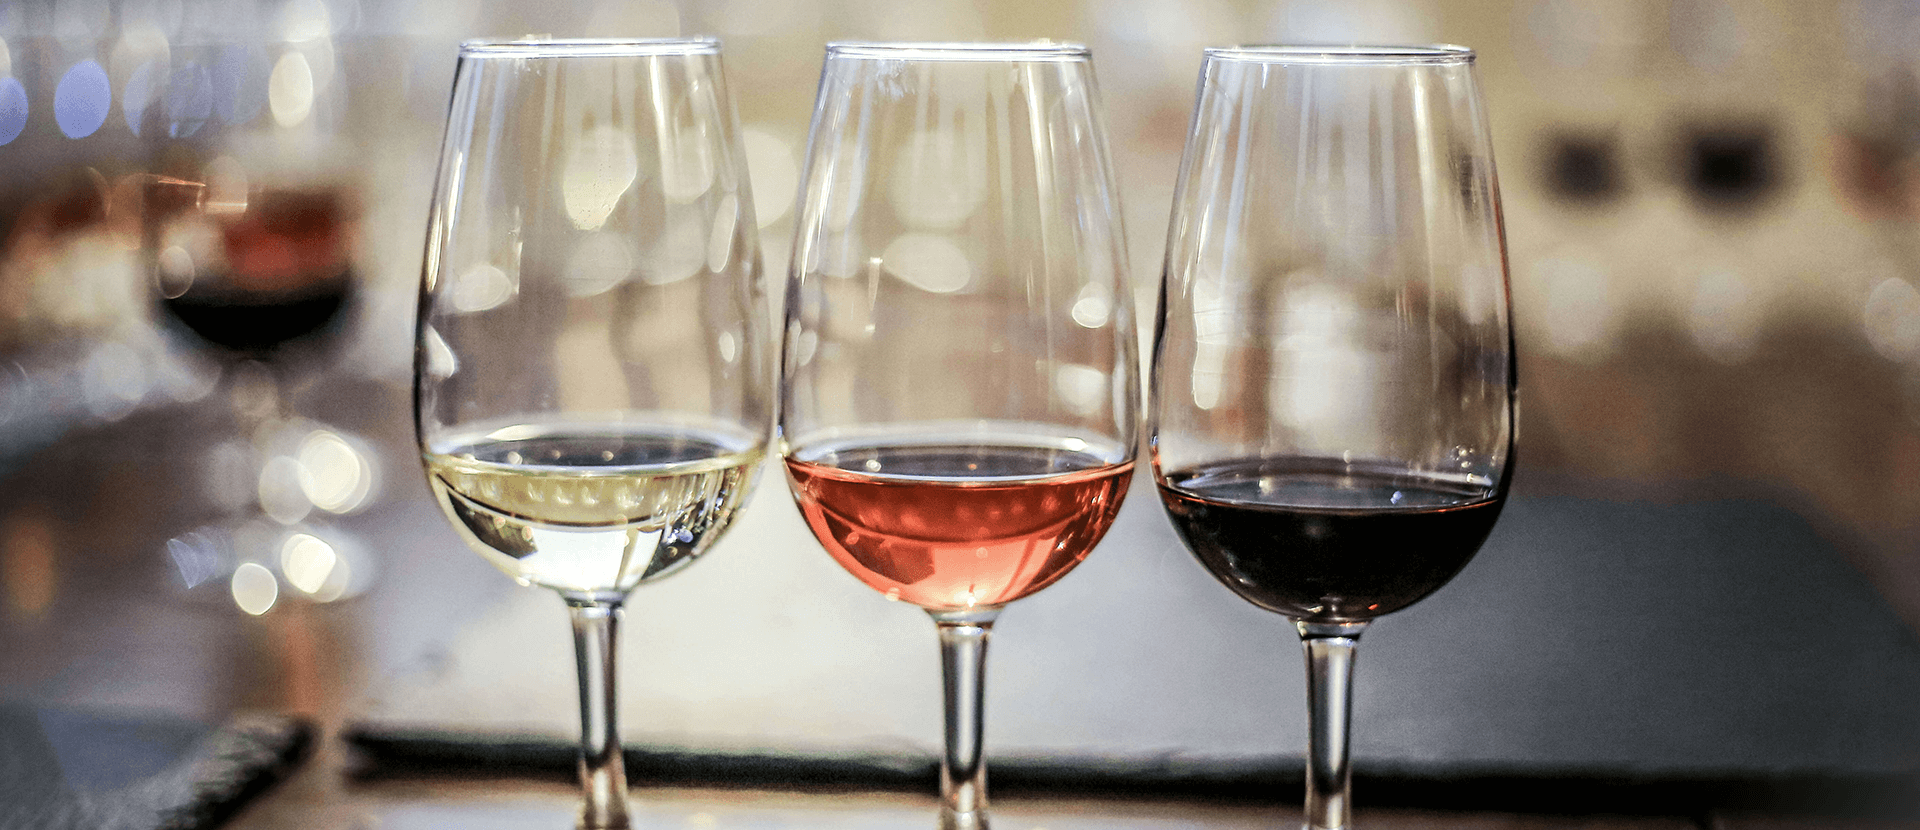 The Top NYC Wine Bars to Visit According to a Local